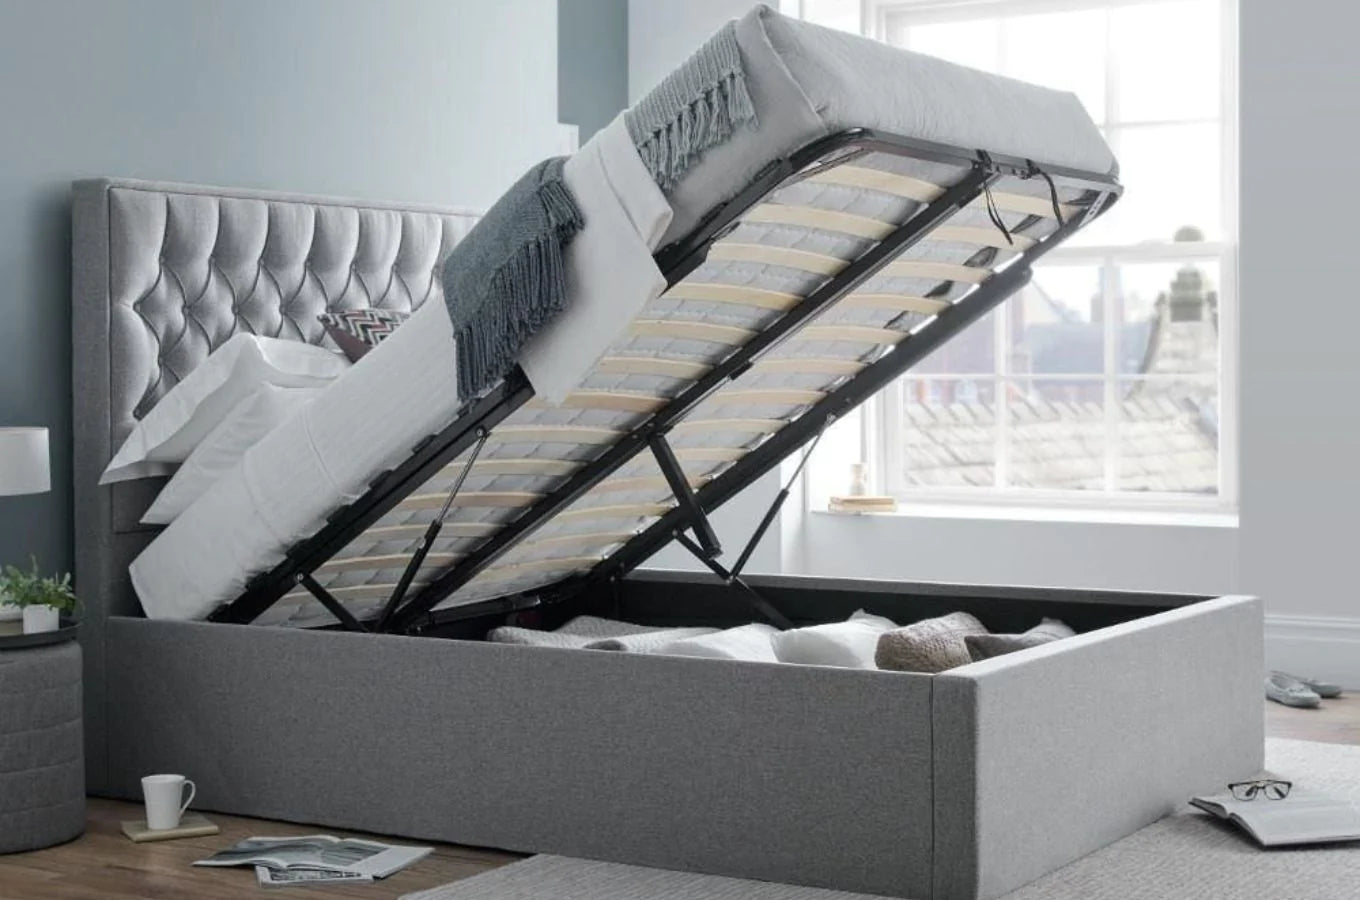 Upto 50% Off Closeout Deal Ottoman Storage Beds  | Limited Time Only!